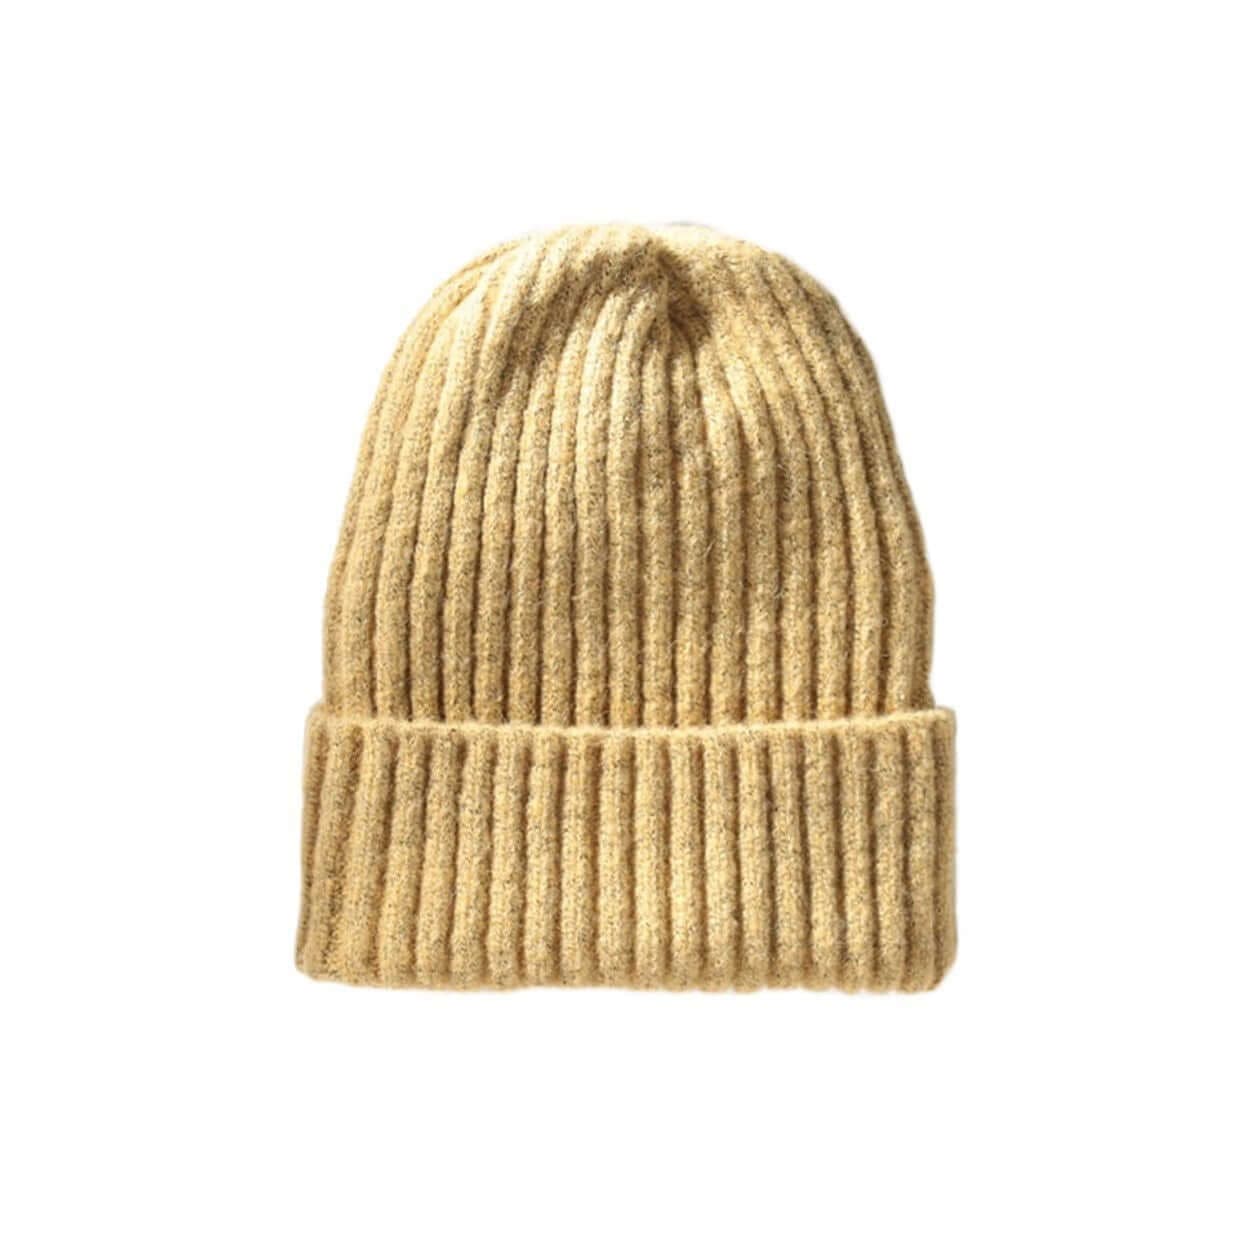 The Long Watch Knit Beanie Image